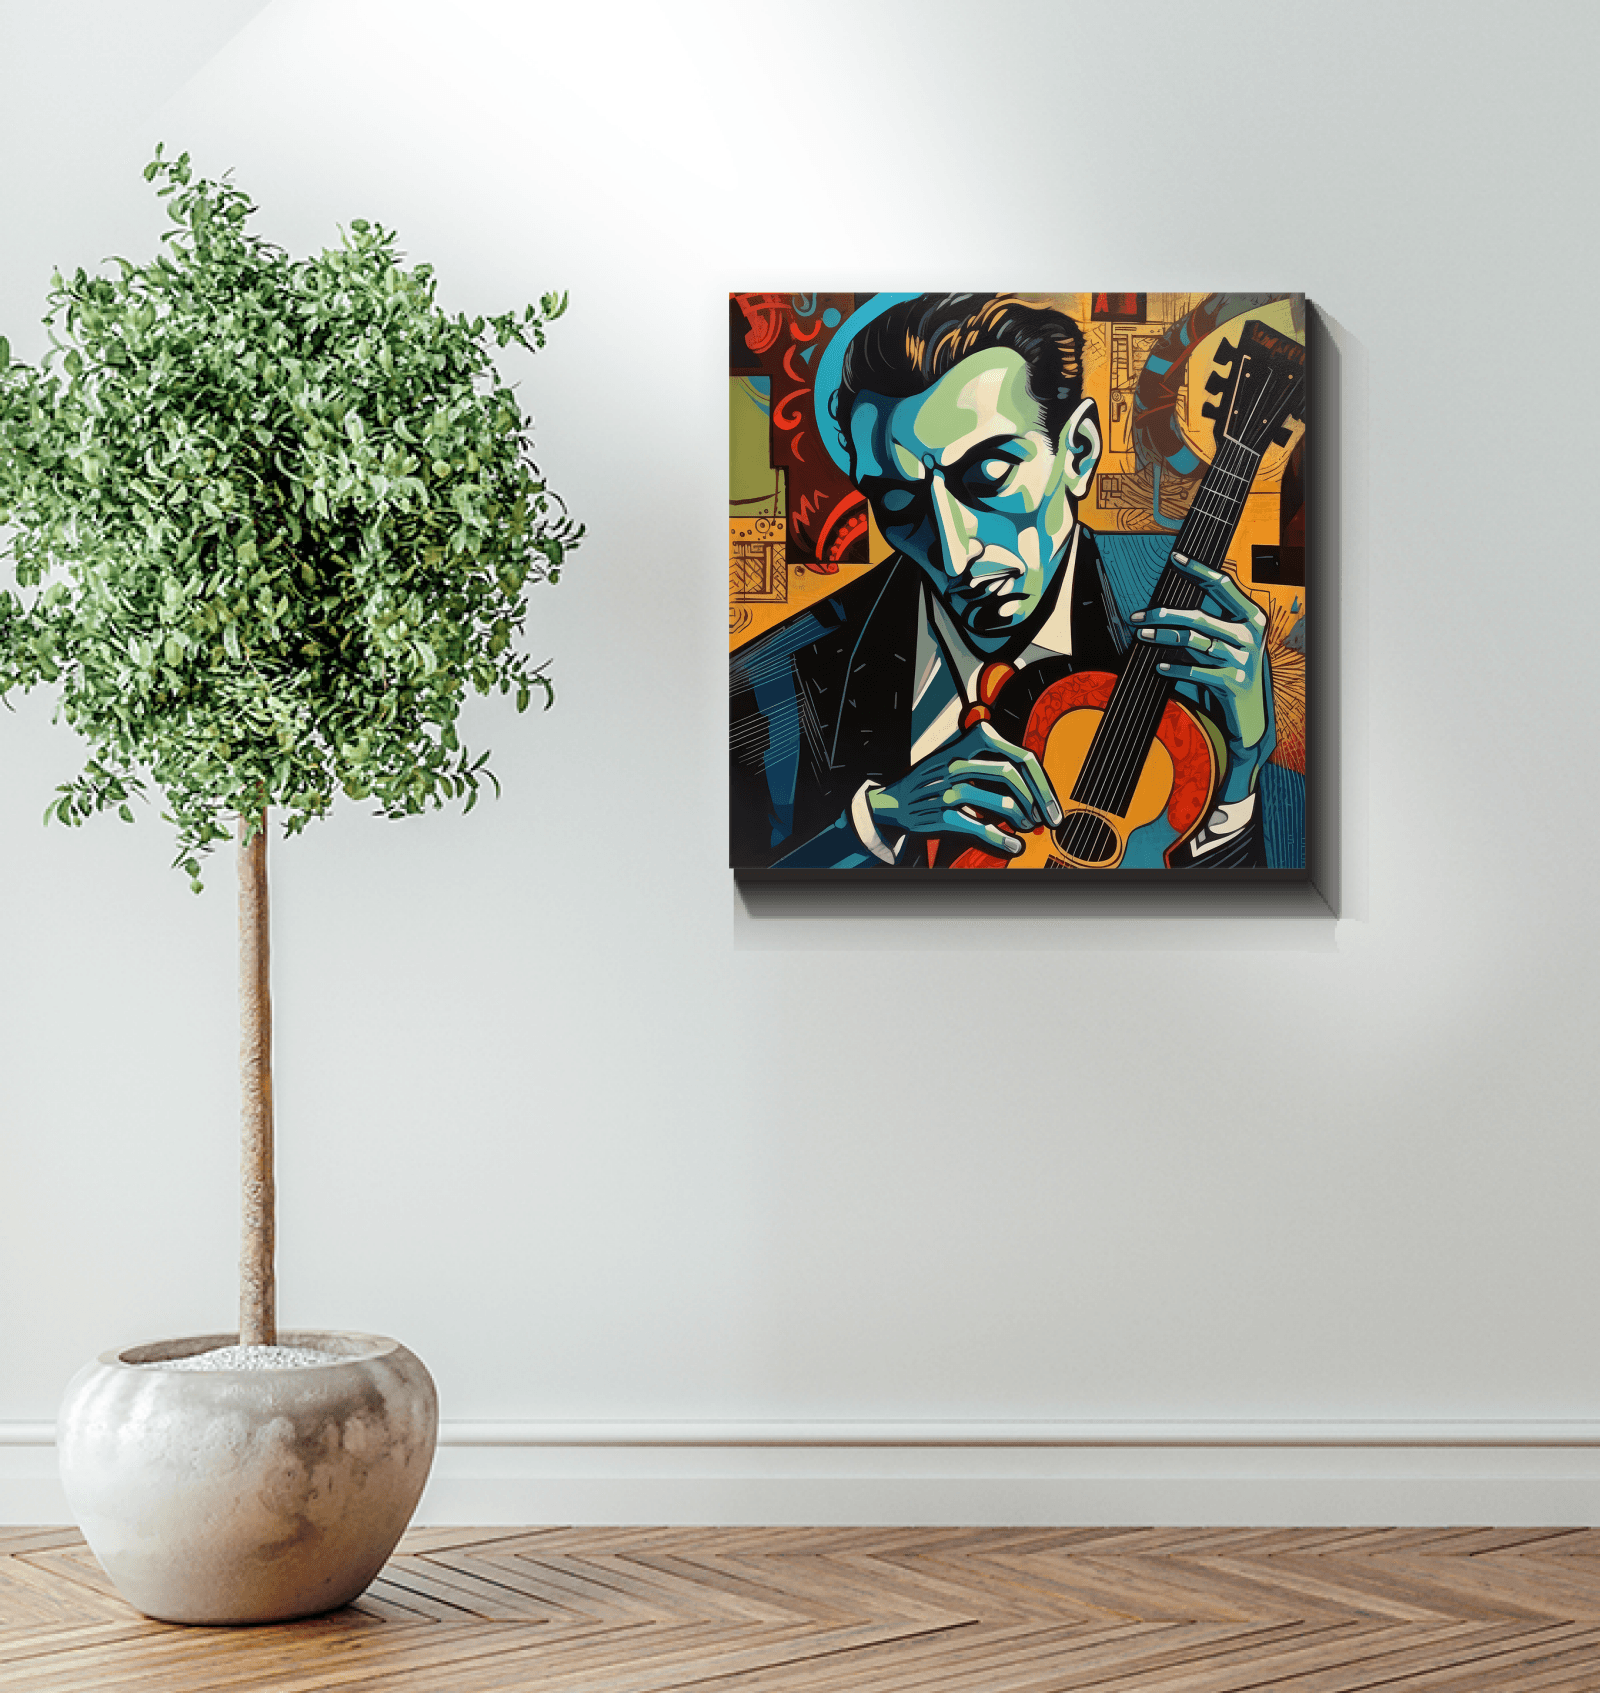 Wrapped canvas of musicians with magical aura for home decor.